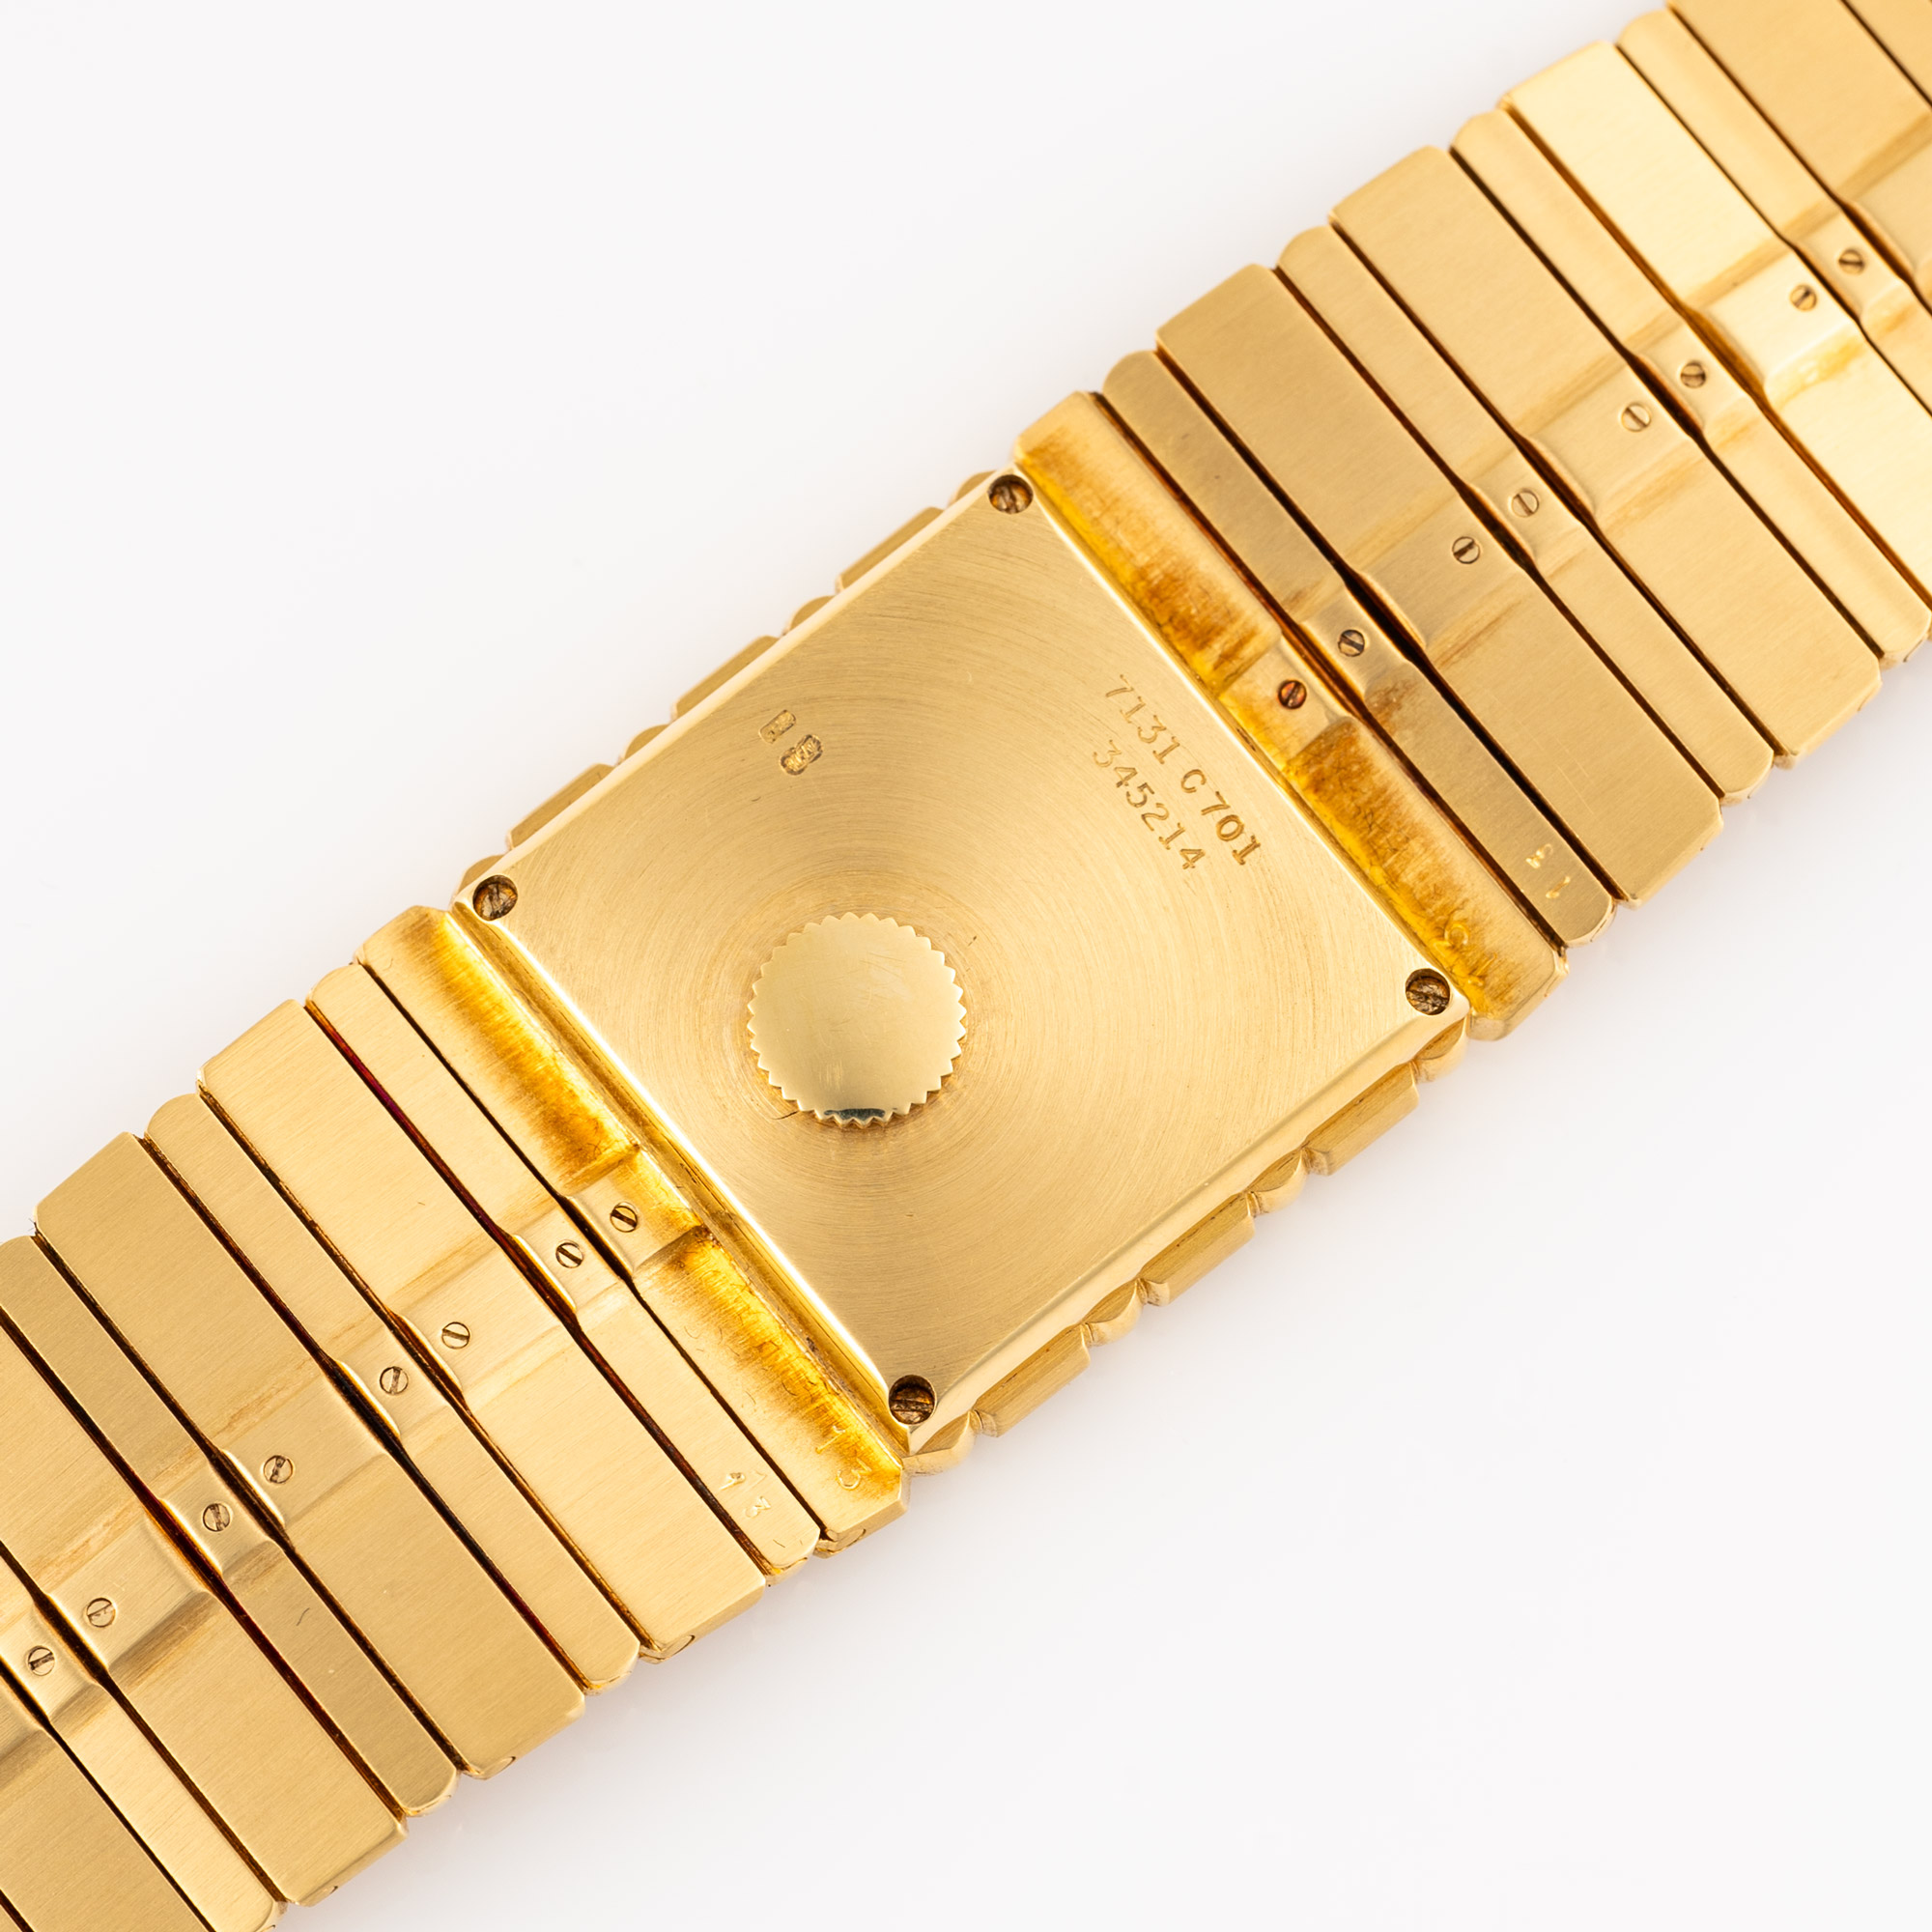 A GENTLEMAN'S SIZE 18K SOLID GOLD PIAGET POLO BRACELET WATCH CIRCA 1970s, REF. 7131 FIRST SERIES - Image 7 of 8